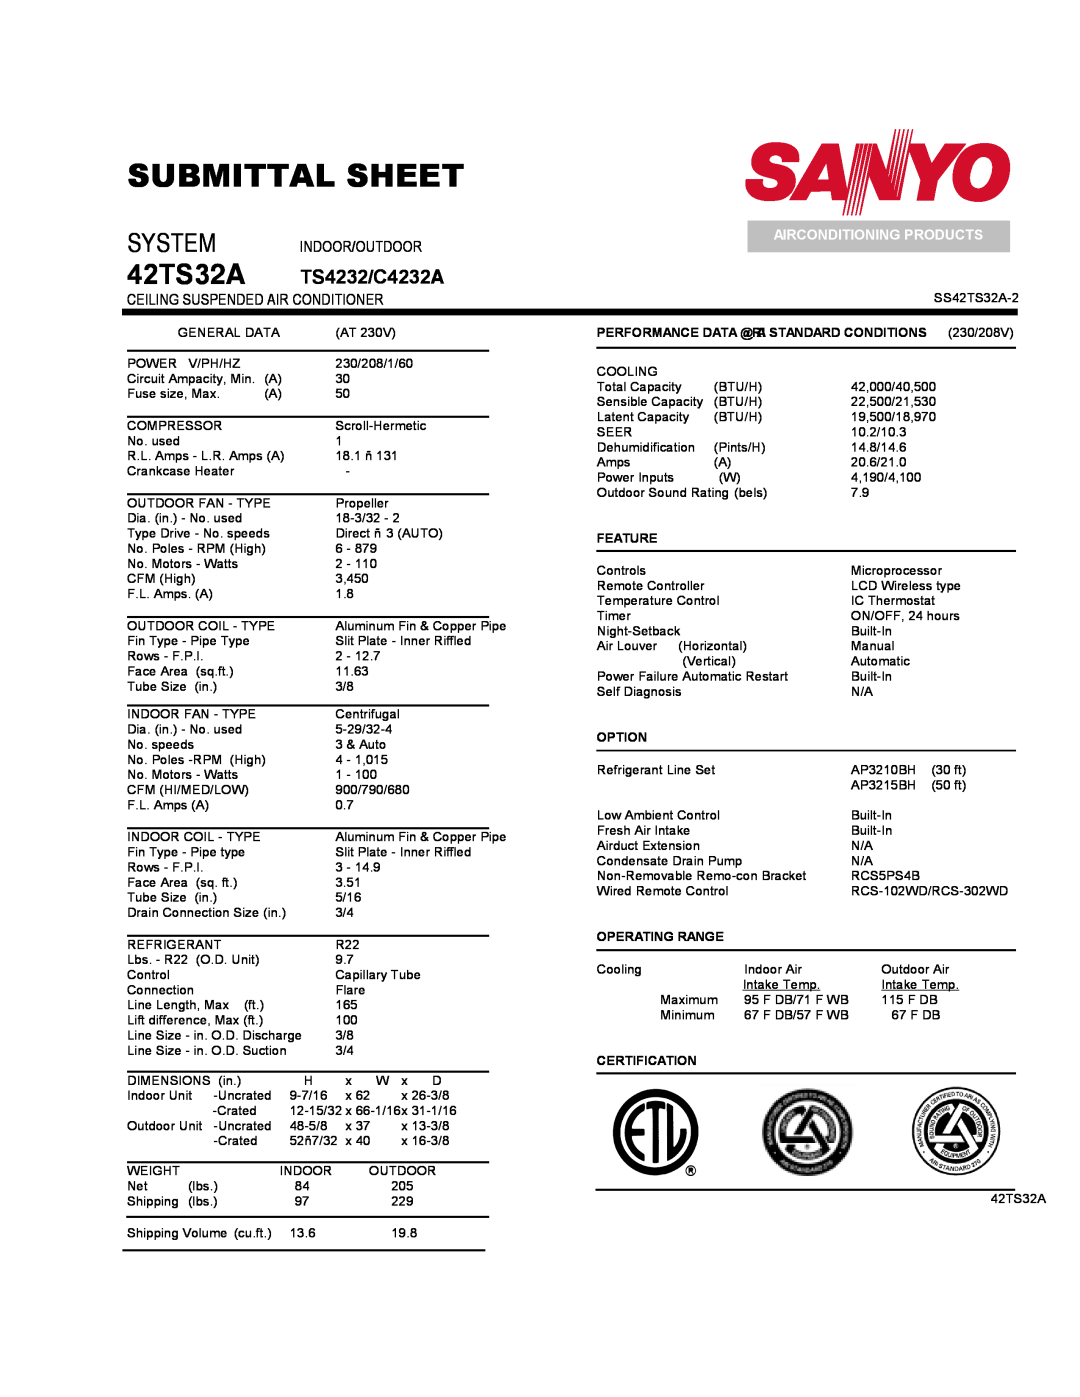 Sanyo 42TS32A dimensions Submittal Sheet, System, Indoor/Outdoor, Ceiling Suspended Air Conditioner, TS4232/C4232A, Option 